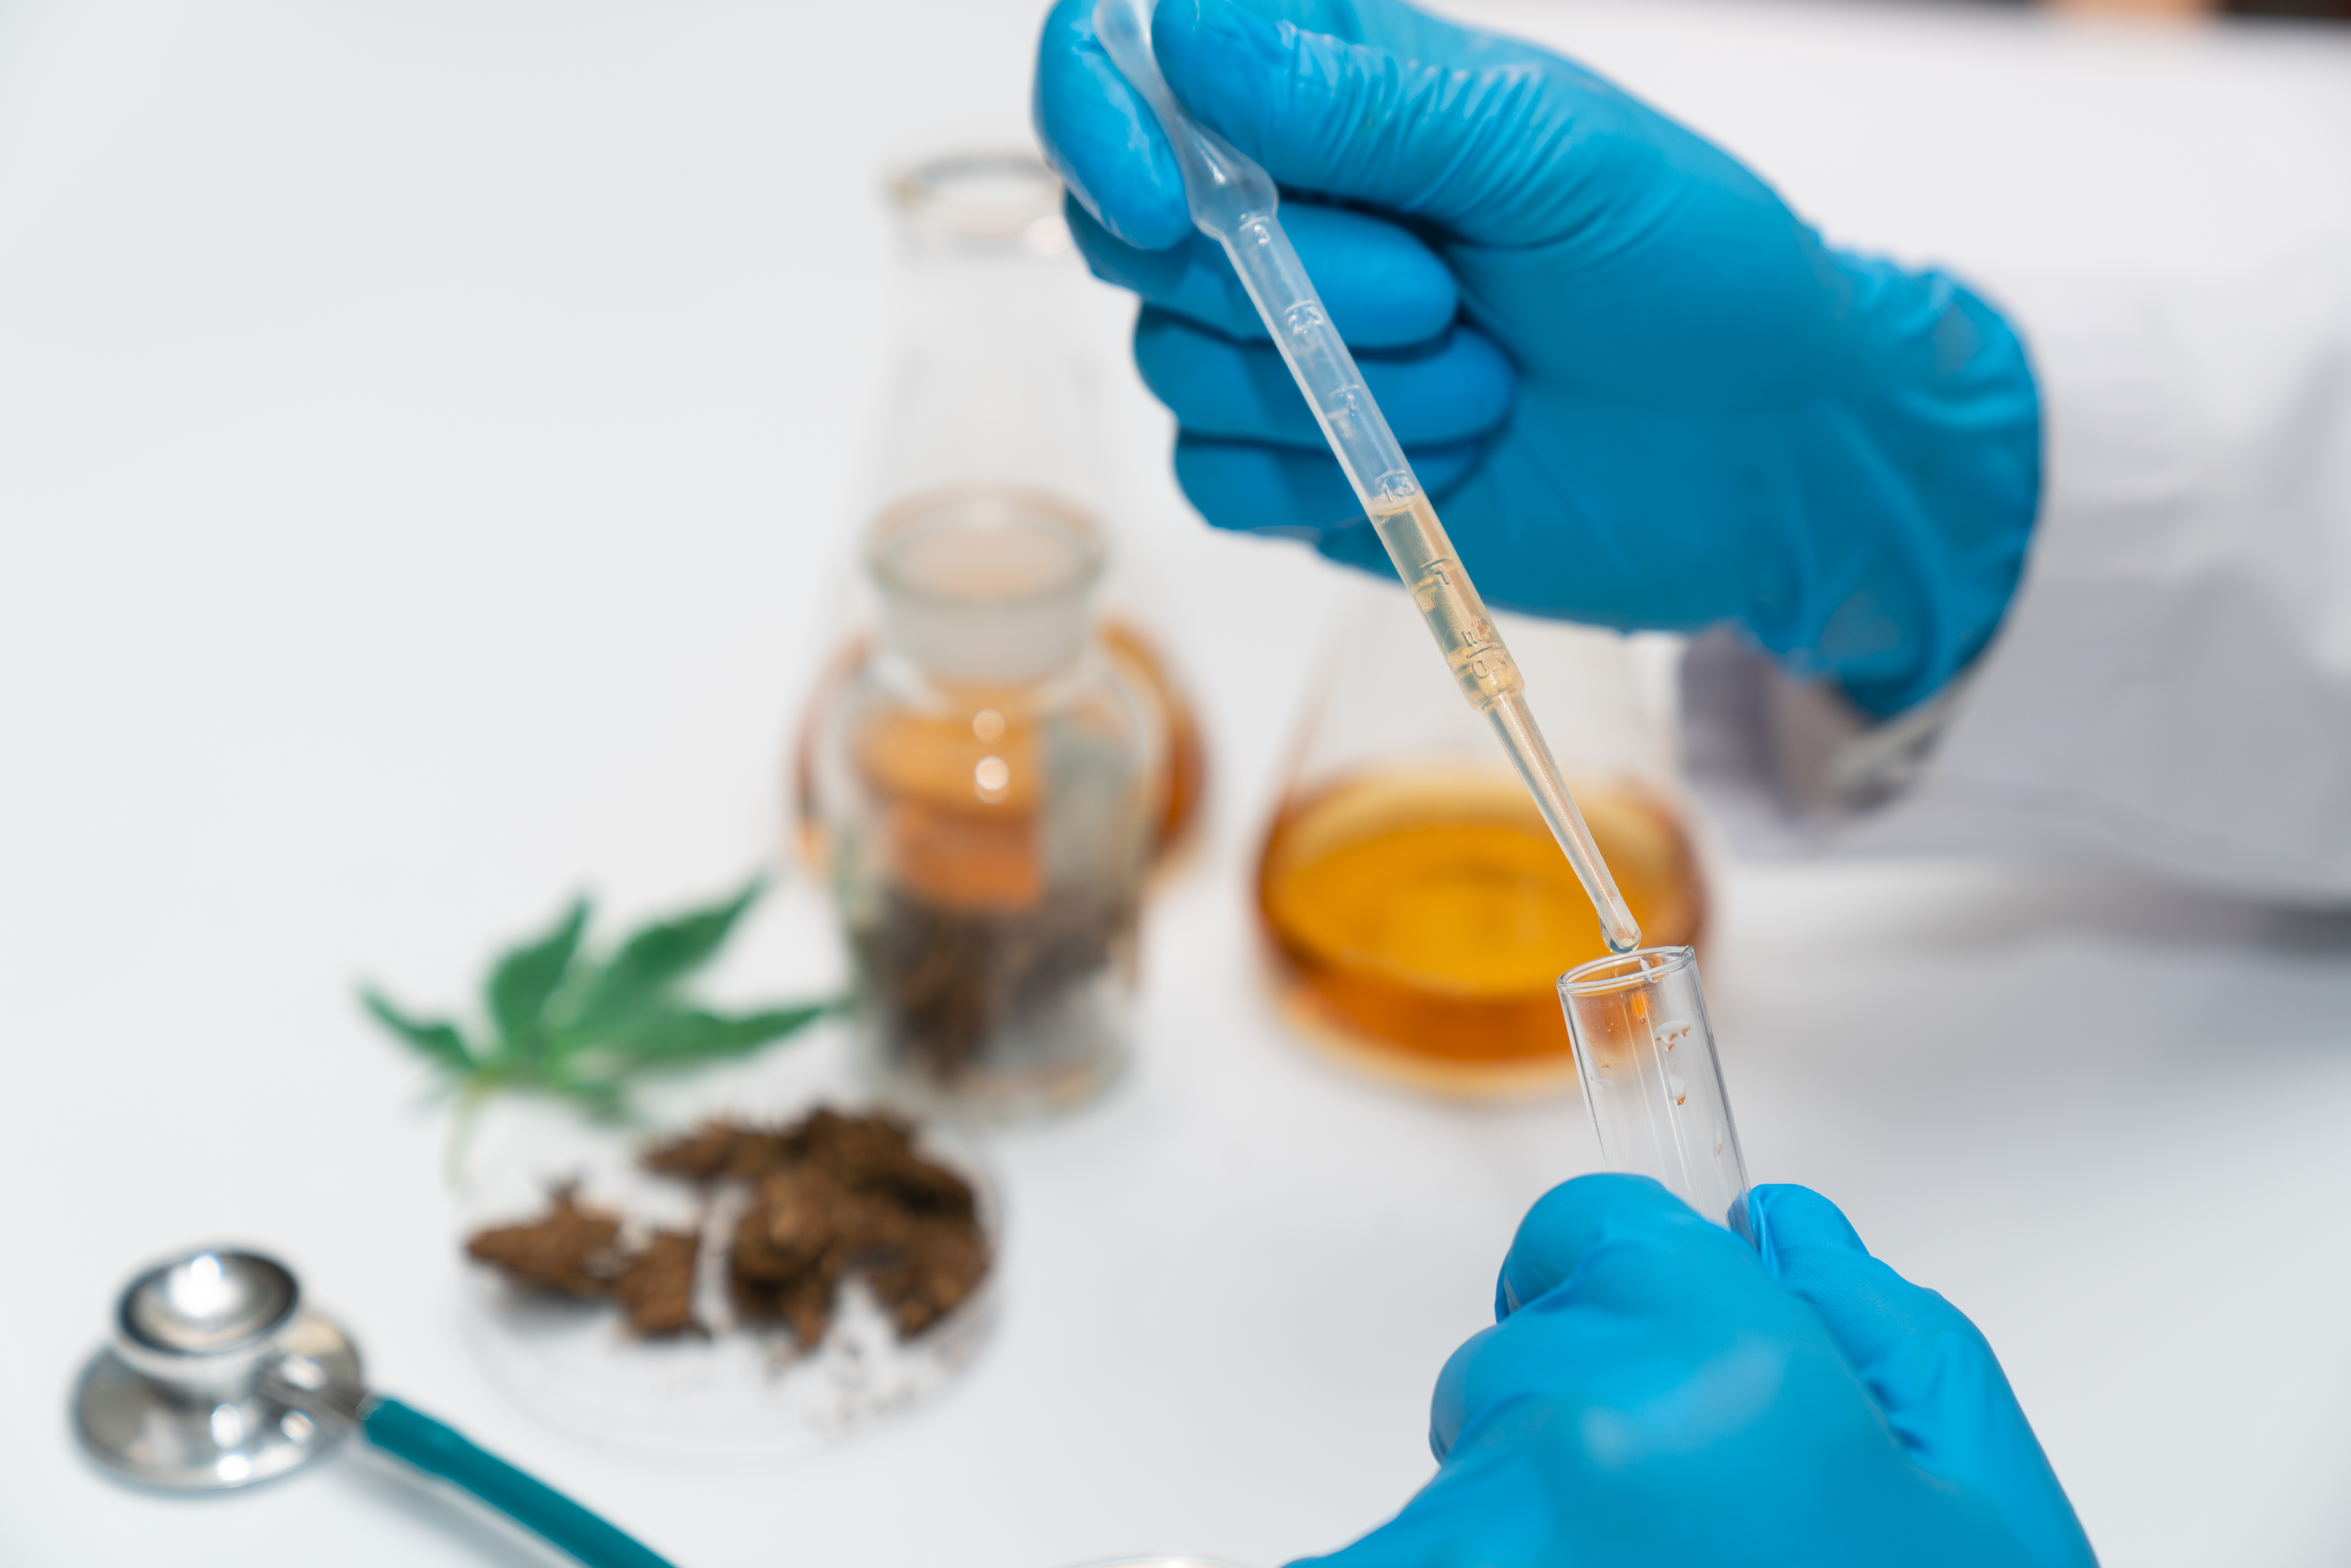 Marijuana and infertility? Learn more about the link between cannabis and fertility